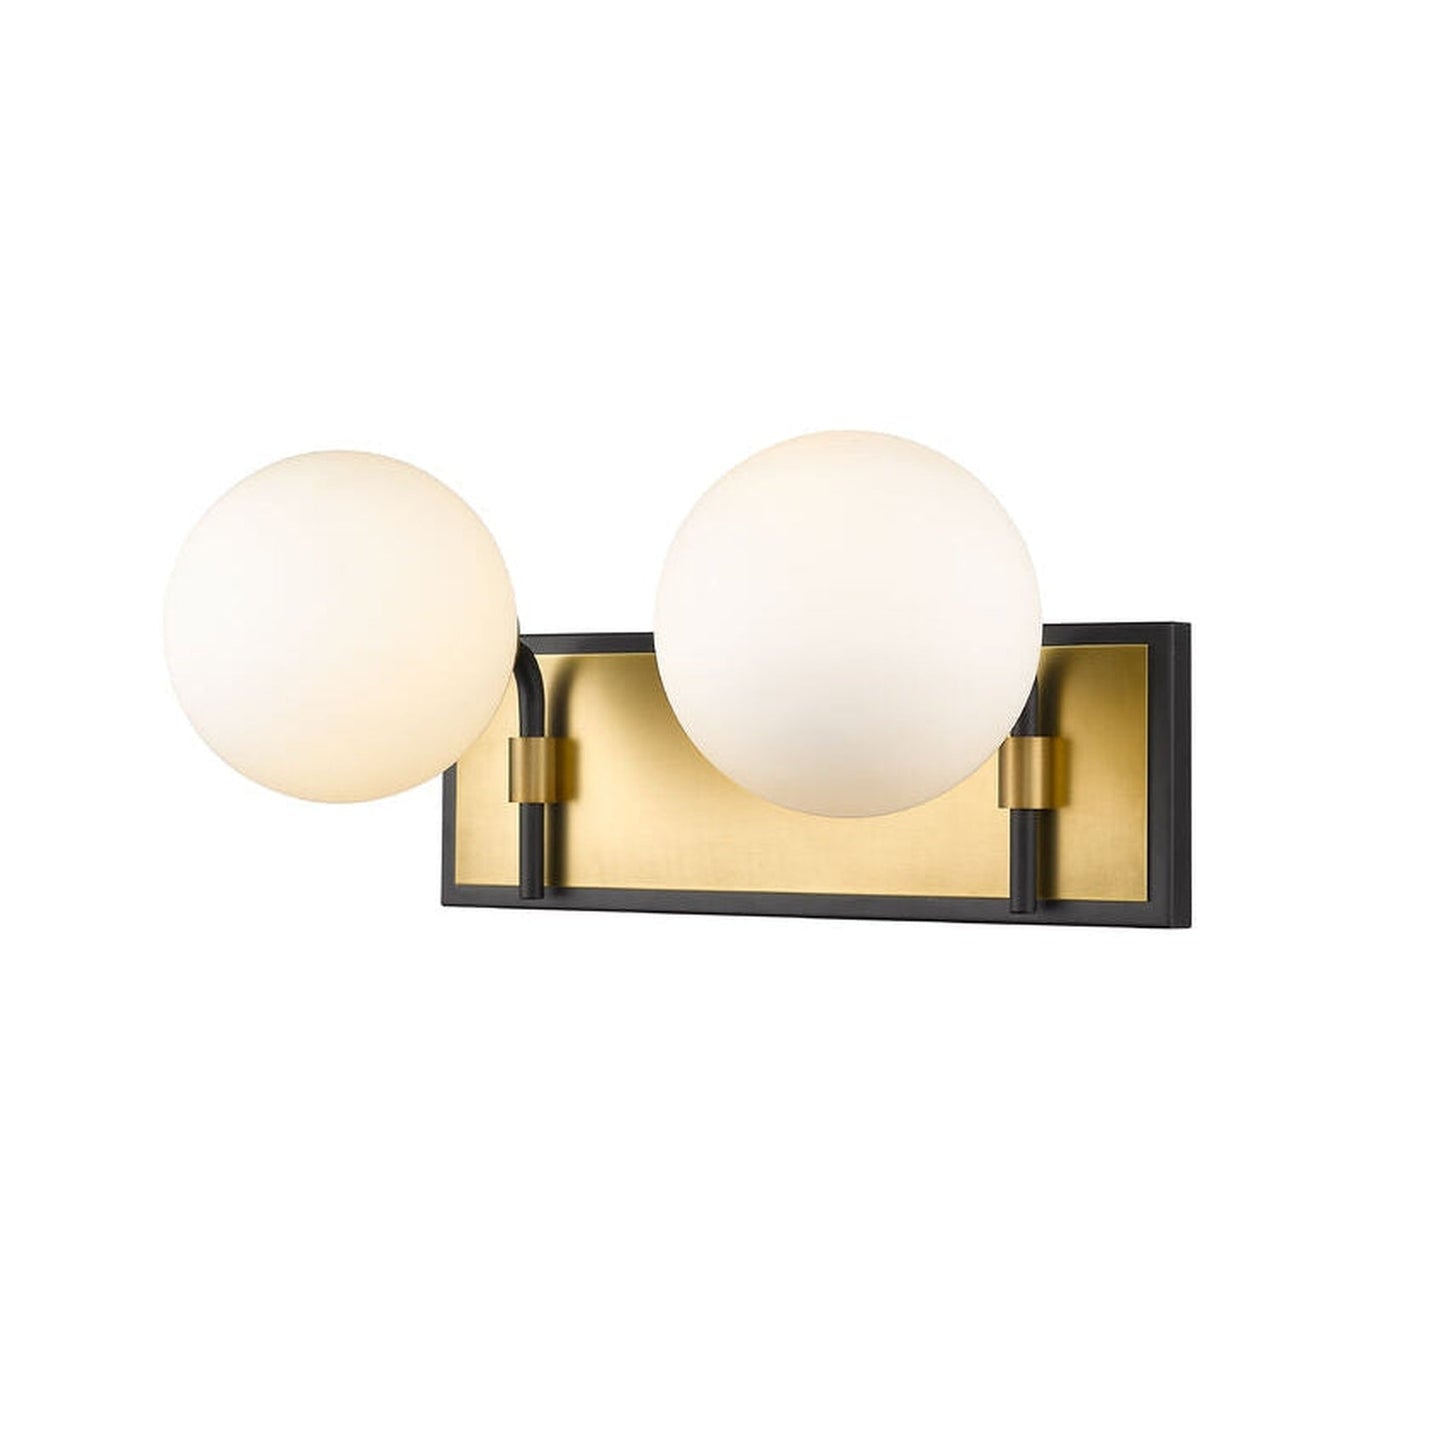 Z-Lite Parsons 16" 2-Light Matte Black and Olde Brass Vanity Light With Opal Glass Shade